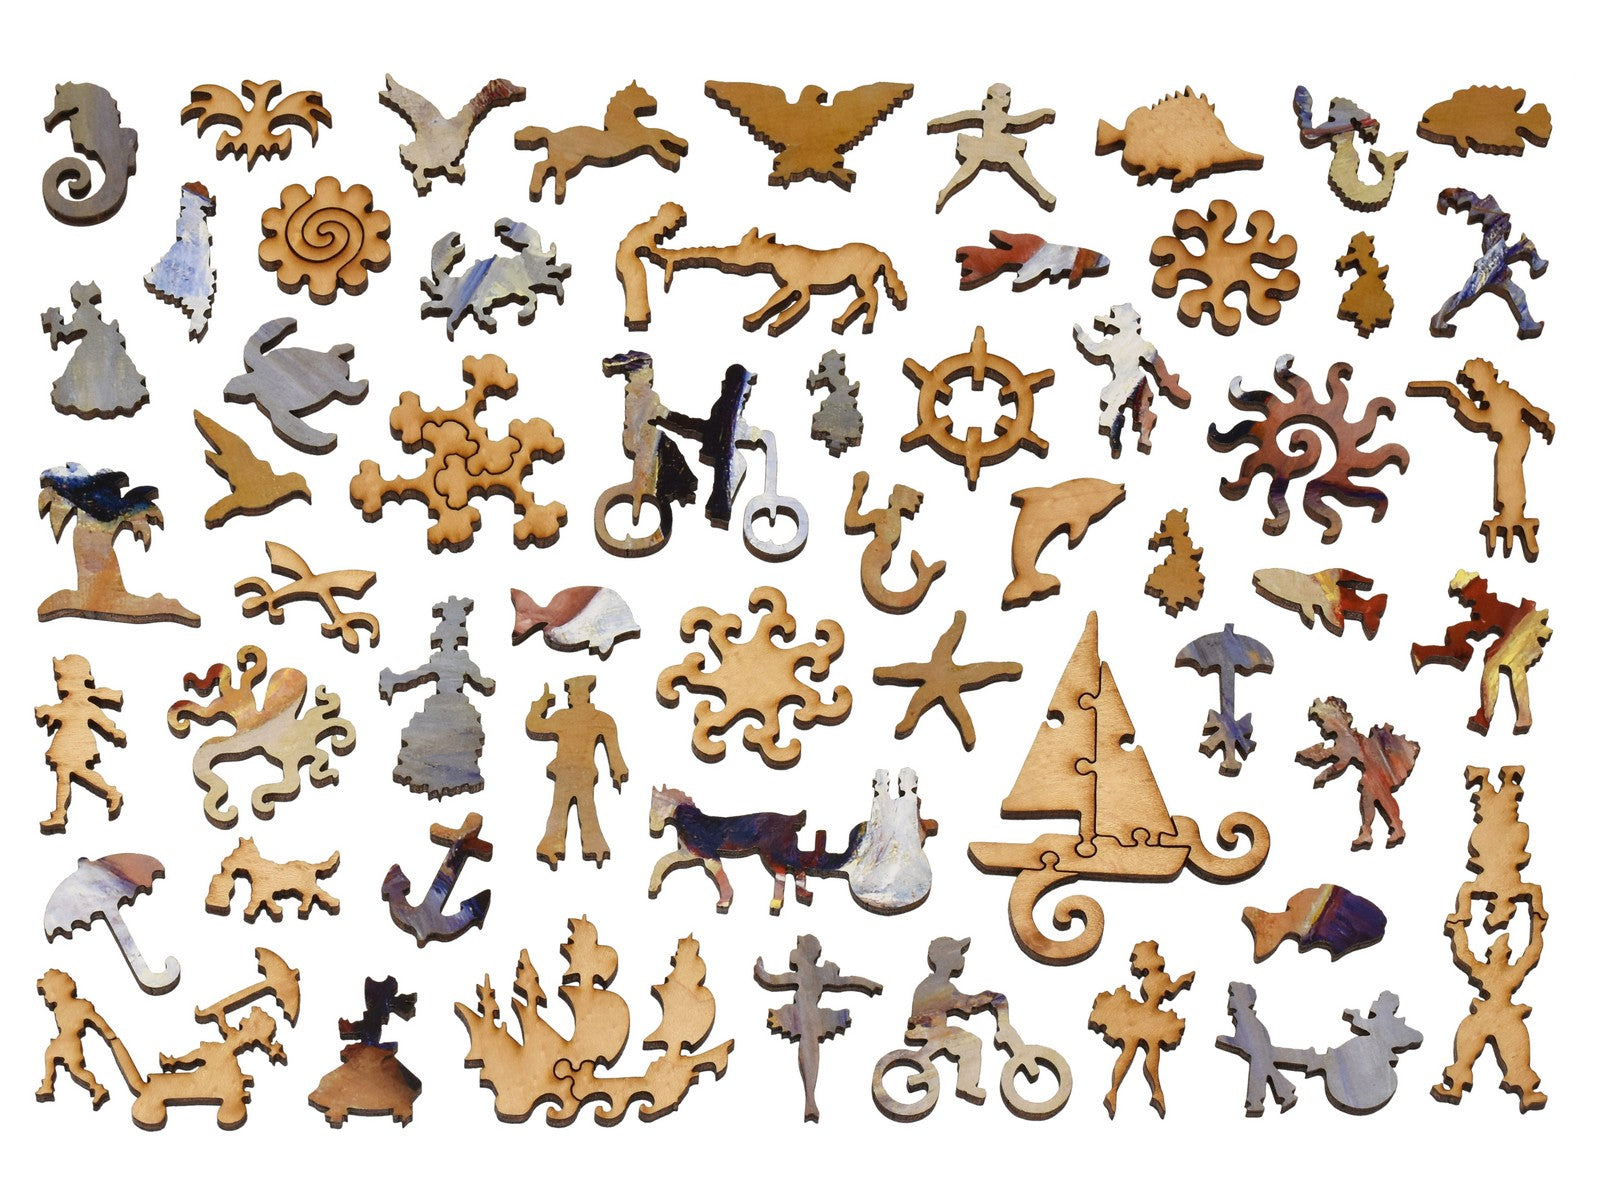 The whimsies that can be found in the puzzle, Children Playing on the Beach.